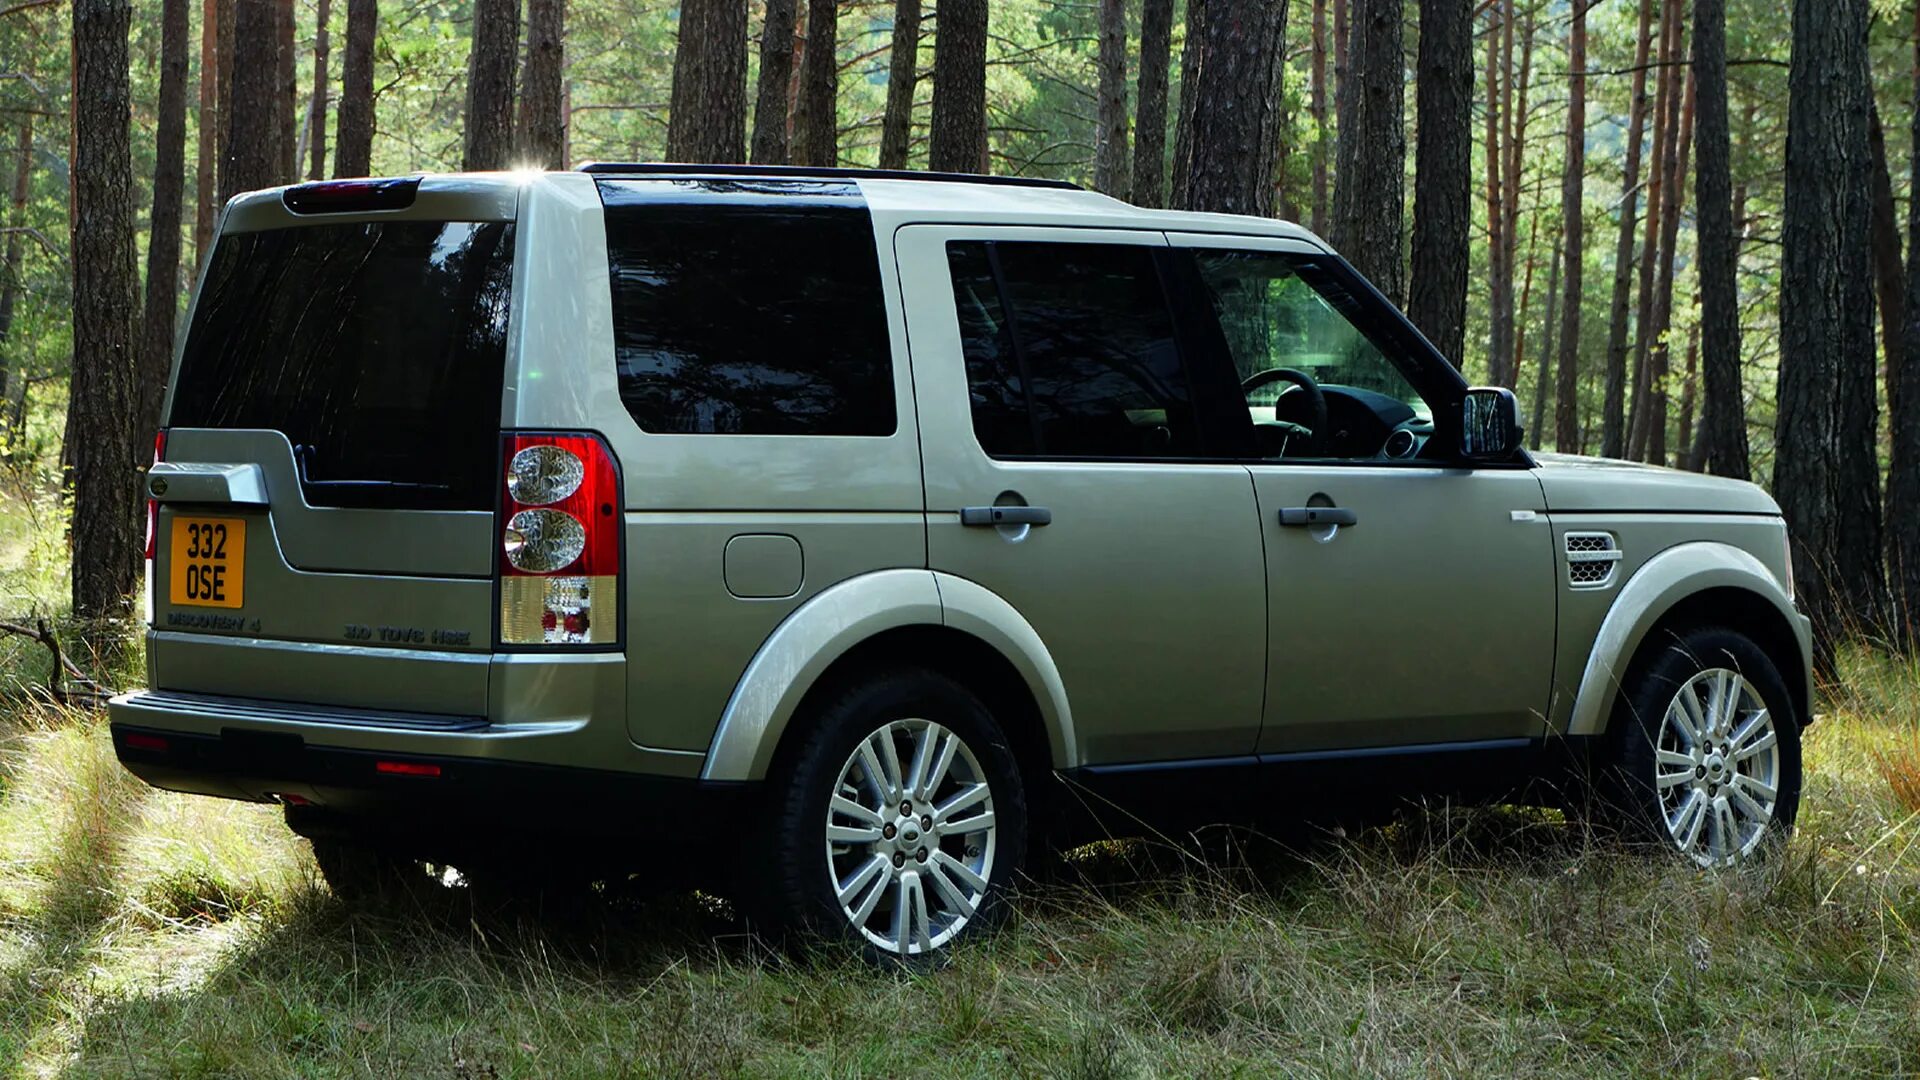 Land Rover Discovery 4. Ленд Ровер Дискавери 4 2009. Лэнд ровыер Дискавери 4. Ленд Ровер Дискавери 4 2014. Ровер дискавери фото